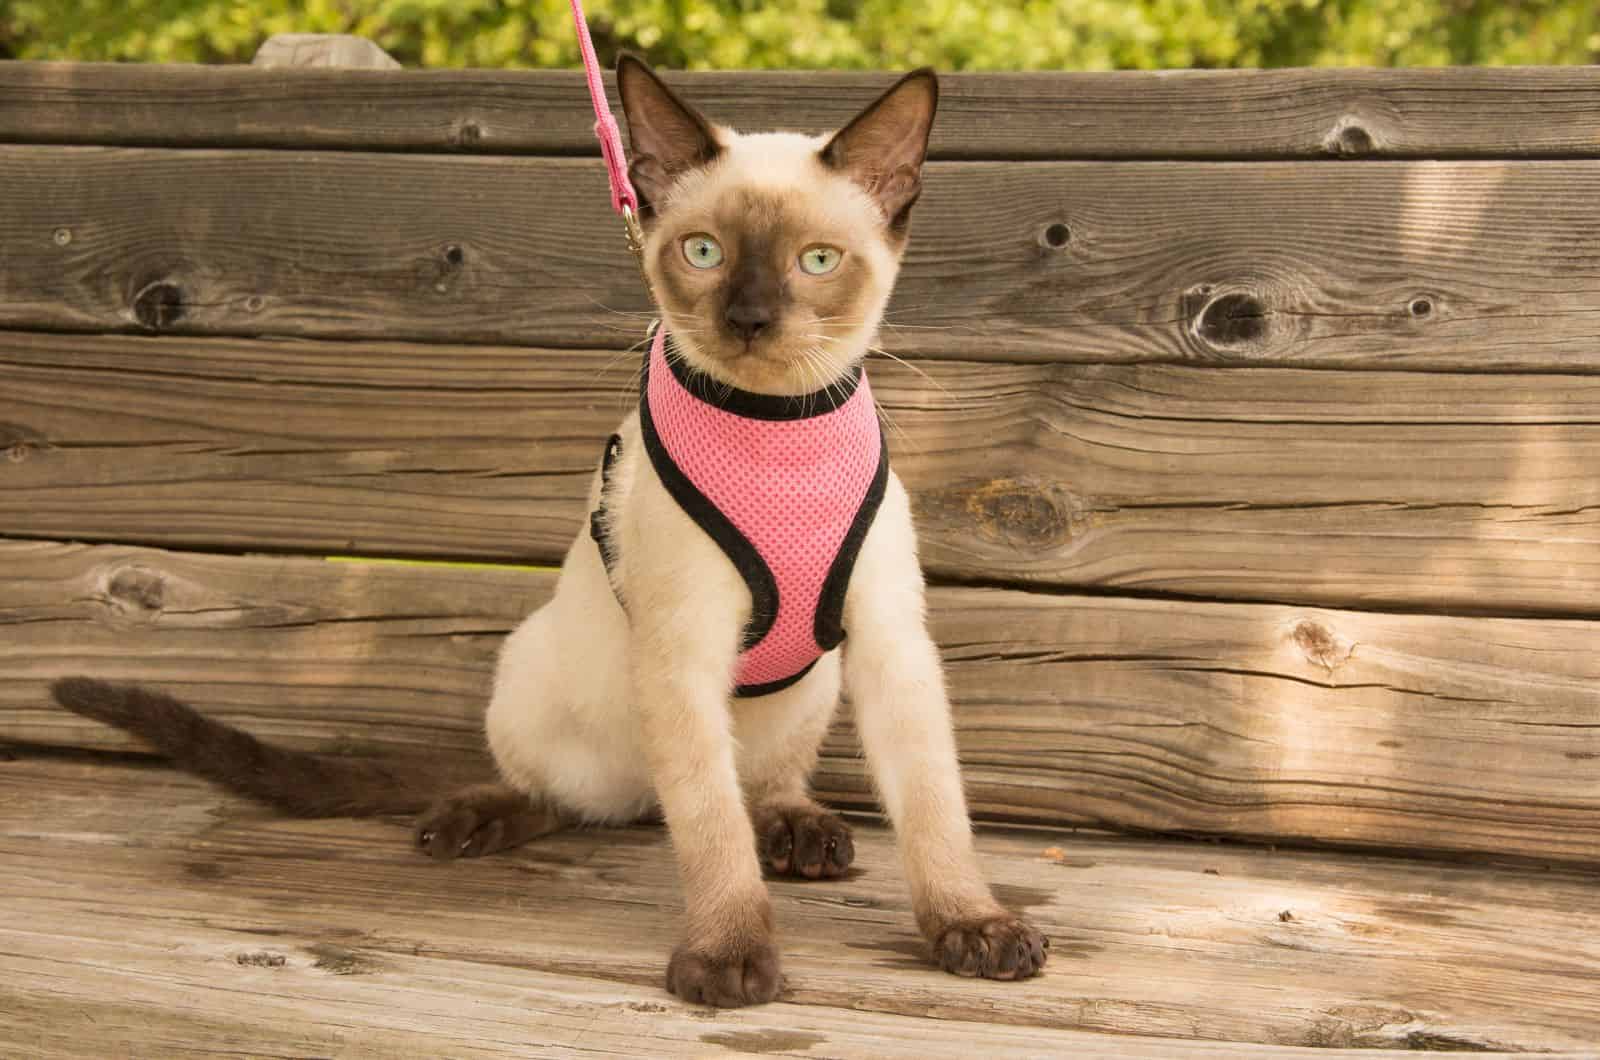  Siamese cat in a pink harness sitting on a wooden bench